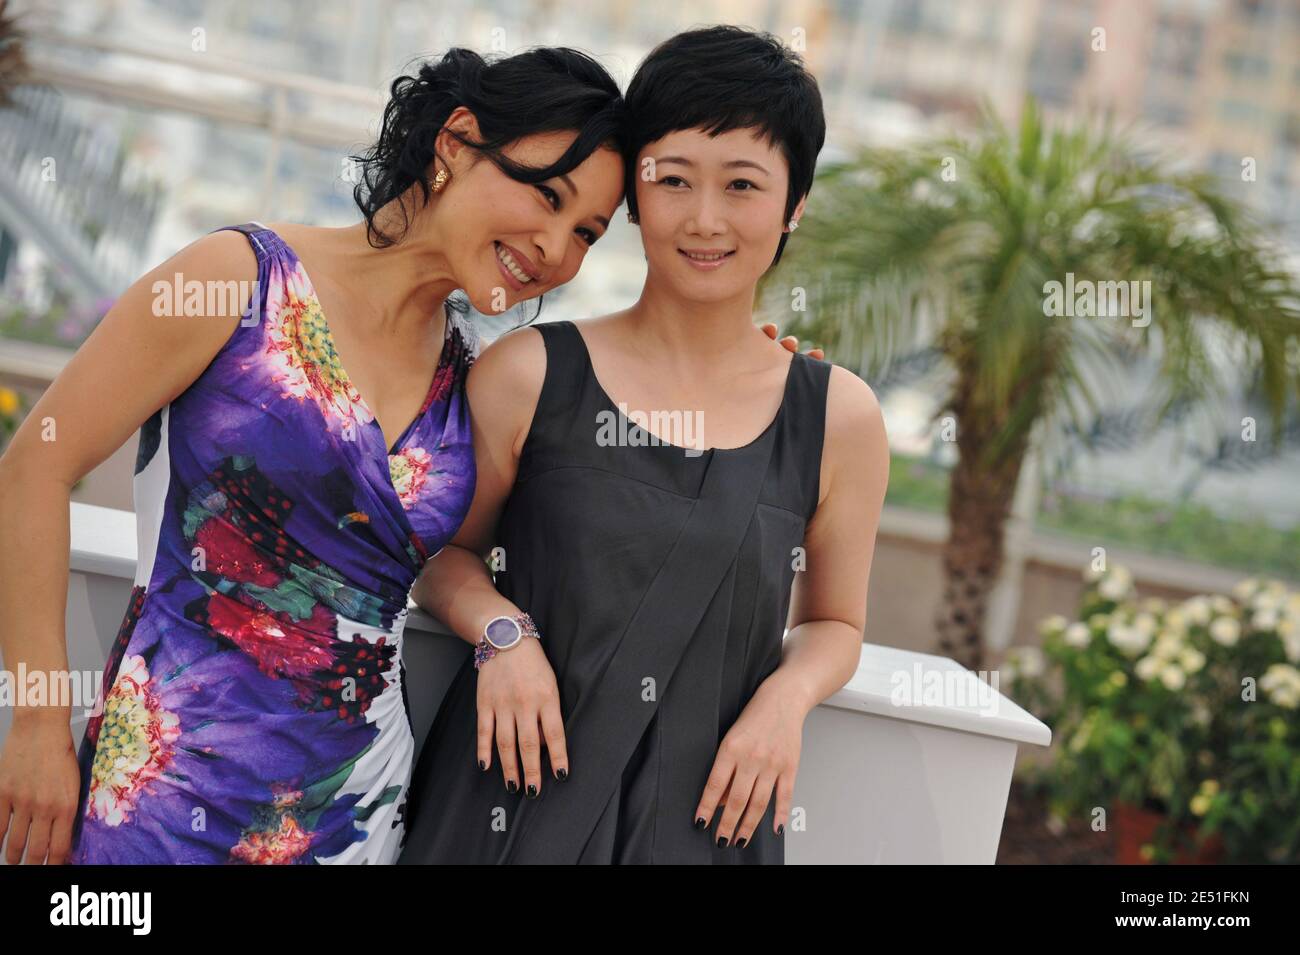 Cast members Joan Chen (L) and Zhao Tao pose at a photocall for the film '24 City' ('Er Shi Si Cheng Ji') during the 61st Cannes Film Festival in Cannes, France on May 17, 2008. Photo by Hahn-Nebinger-Orban/ABACAPRESS.COM Stock Photo